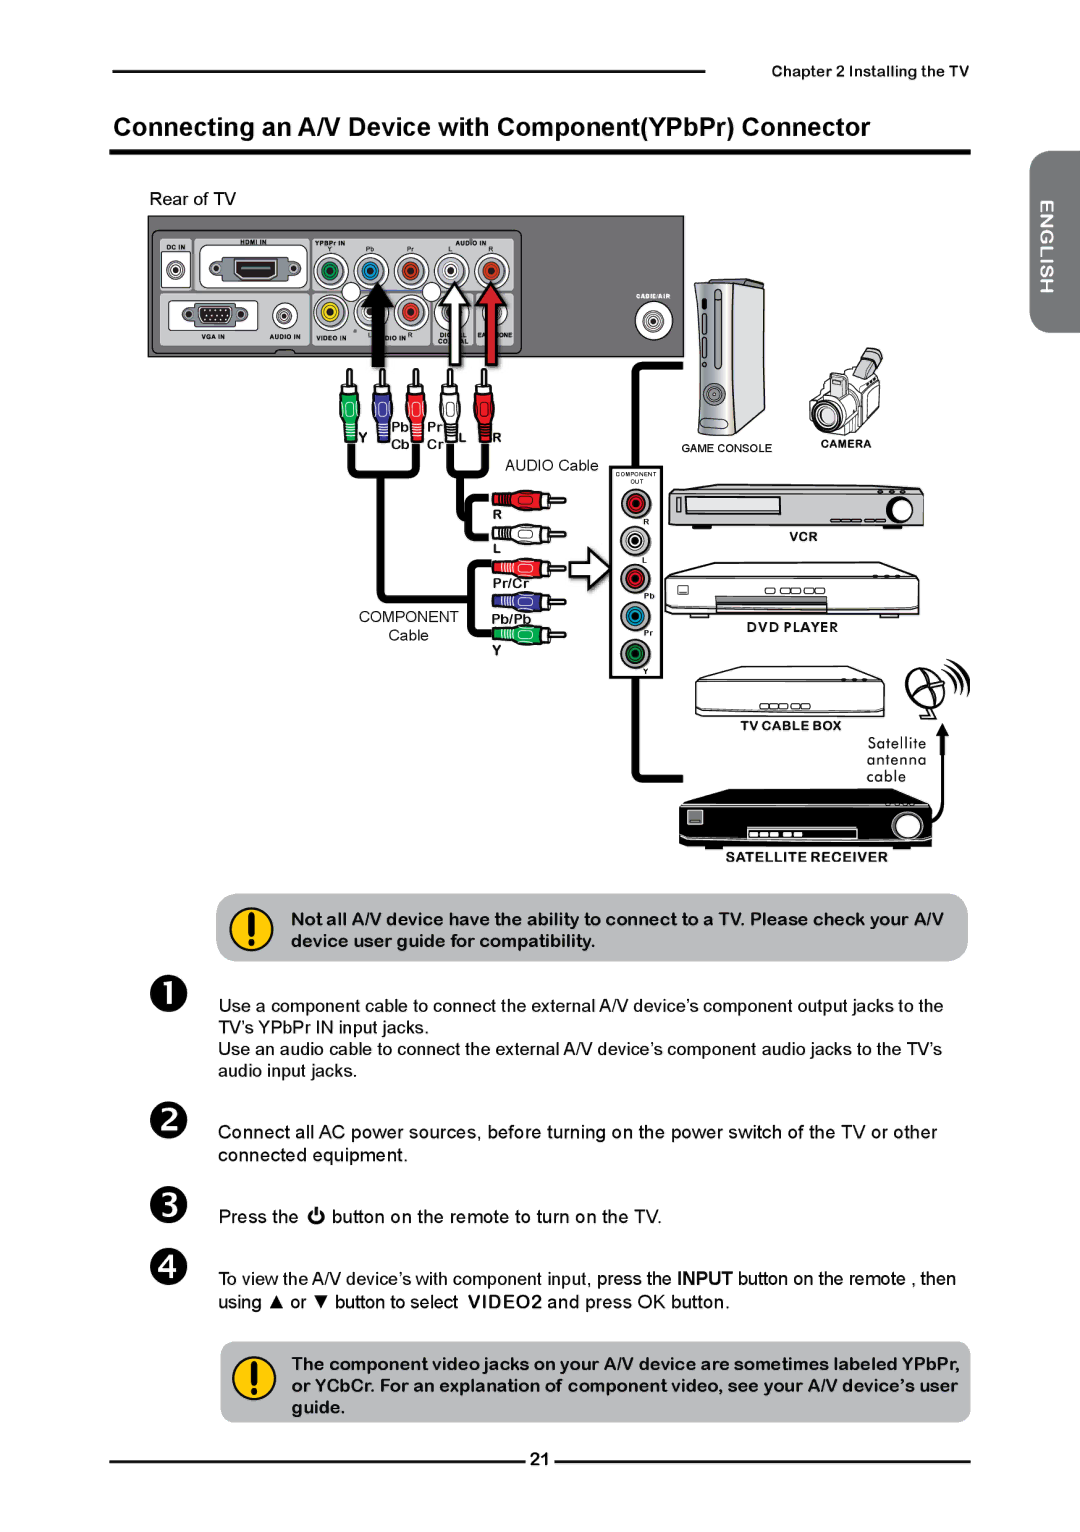 Element Electronics Flat Panel Television manual Connecting an A/V Device with ComponentYPbPr Connector, English 